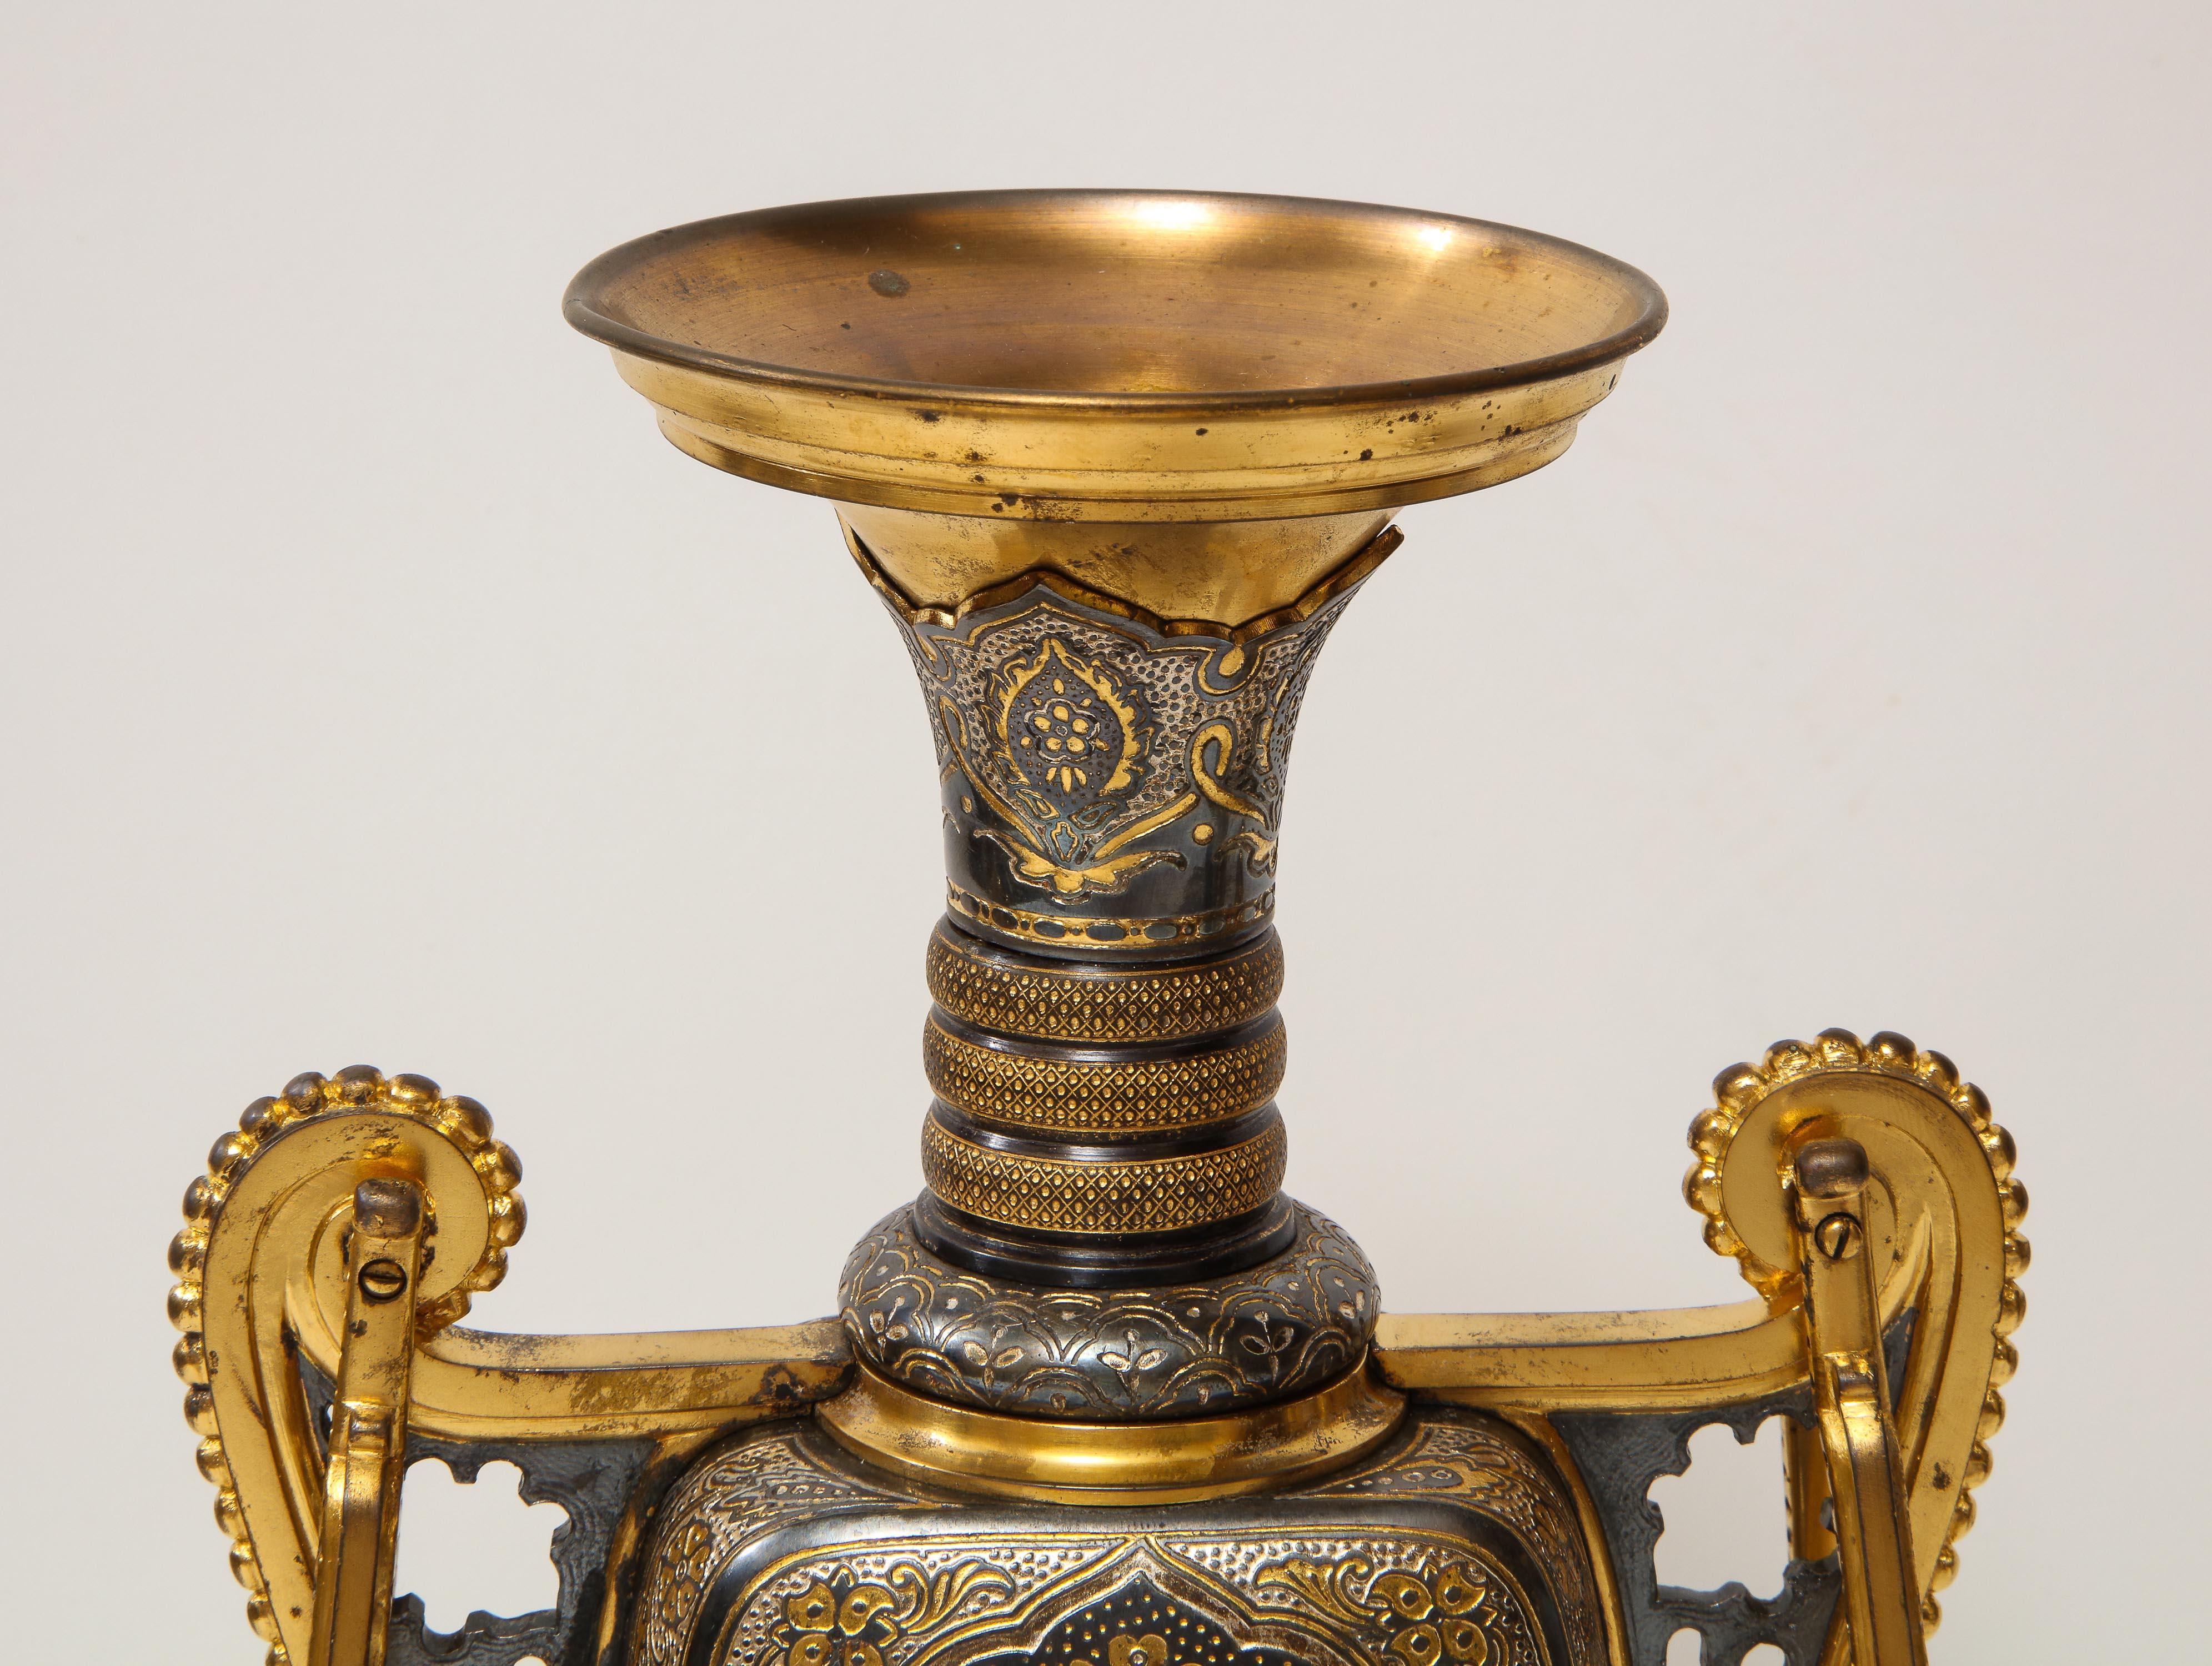 Christofle & Cie, a Pair of French Gilt and Silvered Bronze 